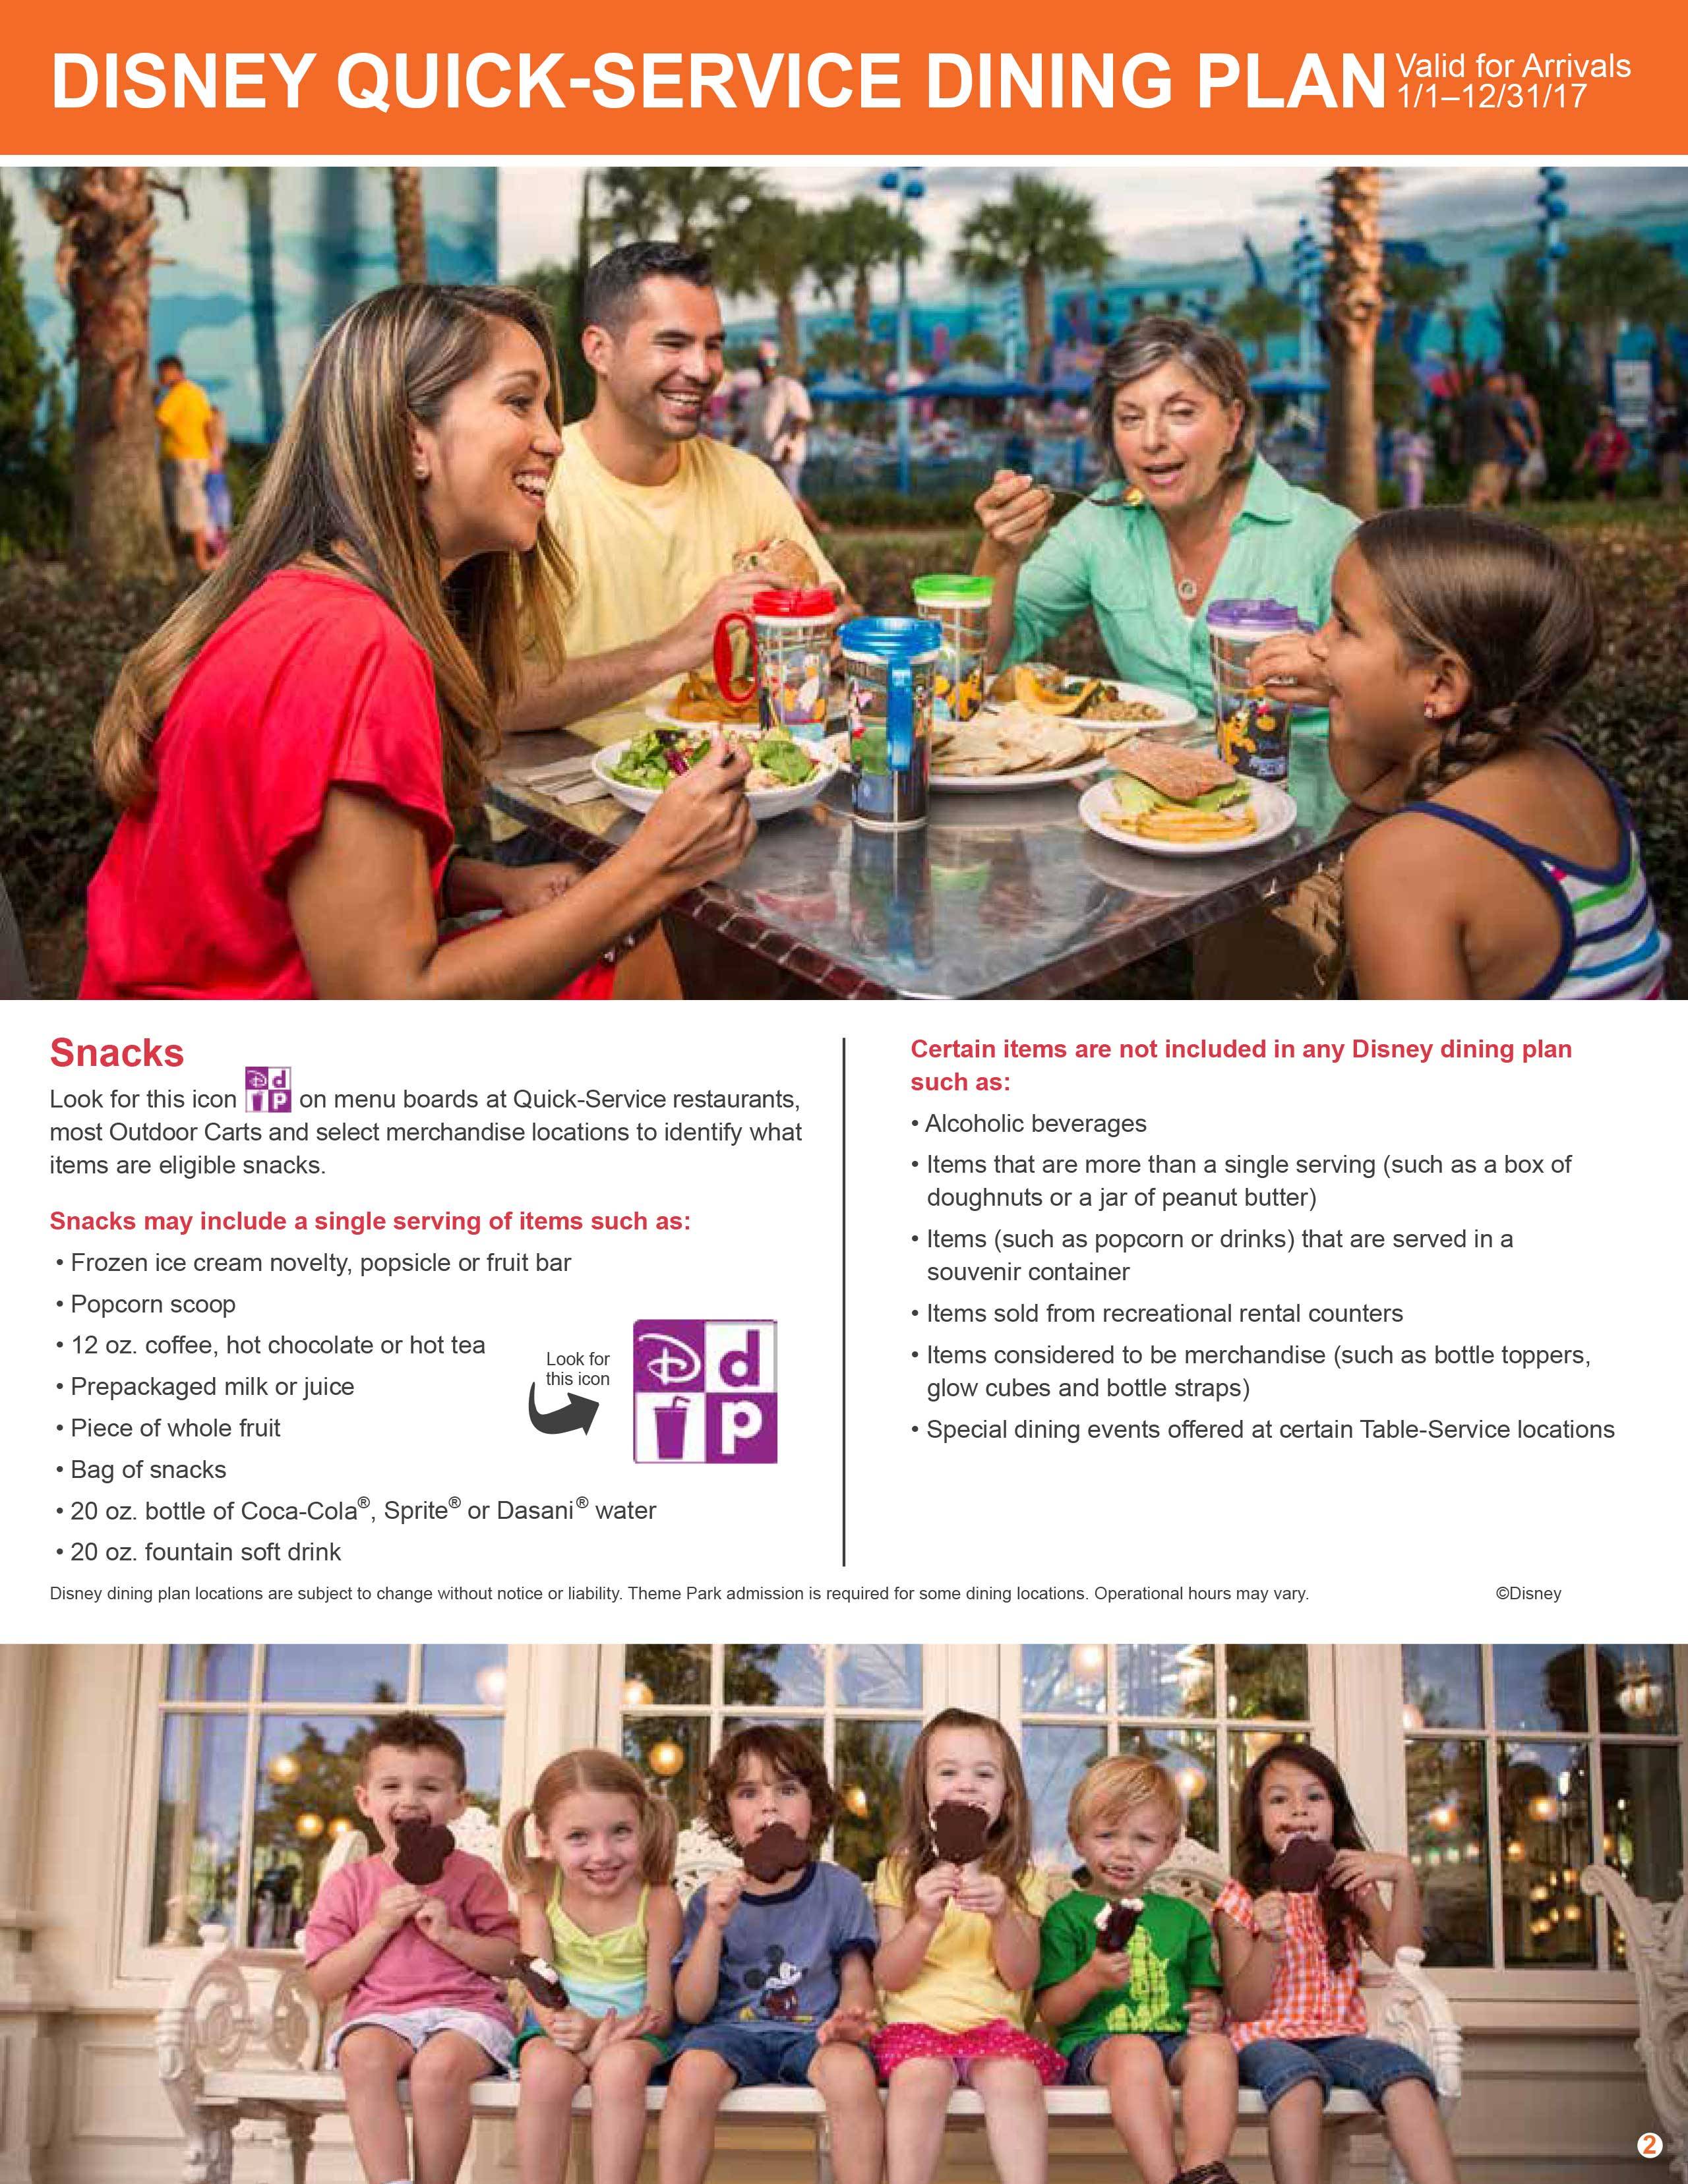 2017 Disney Quick Service Dining Plan brochure - Page 2